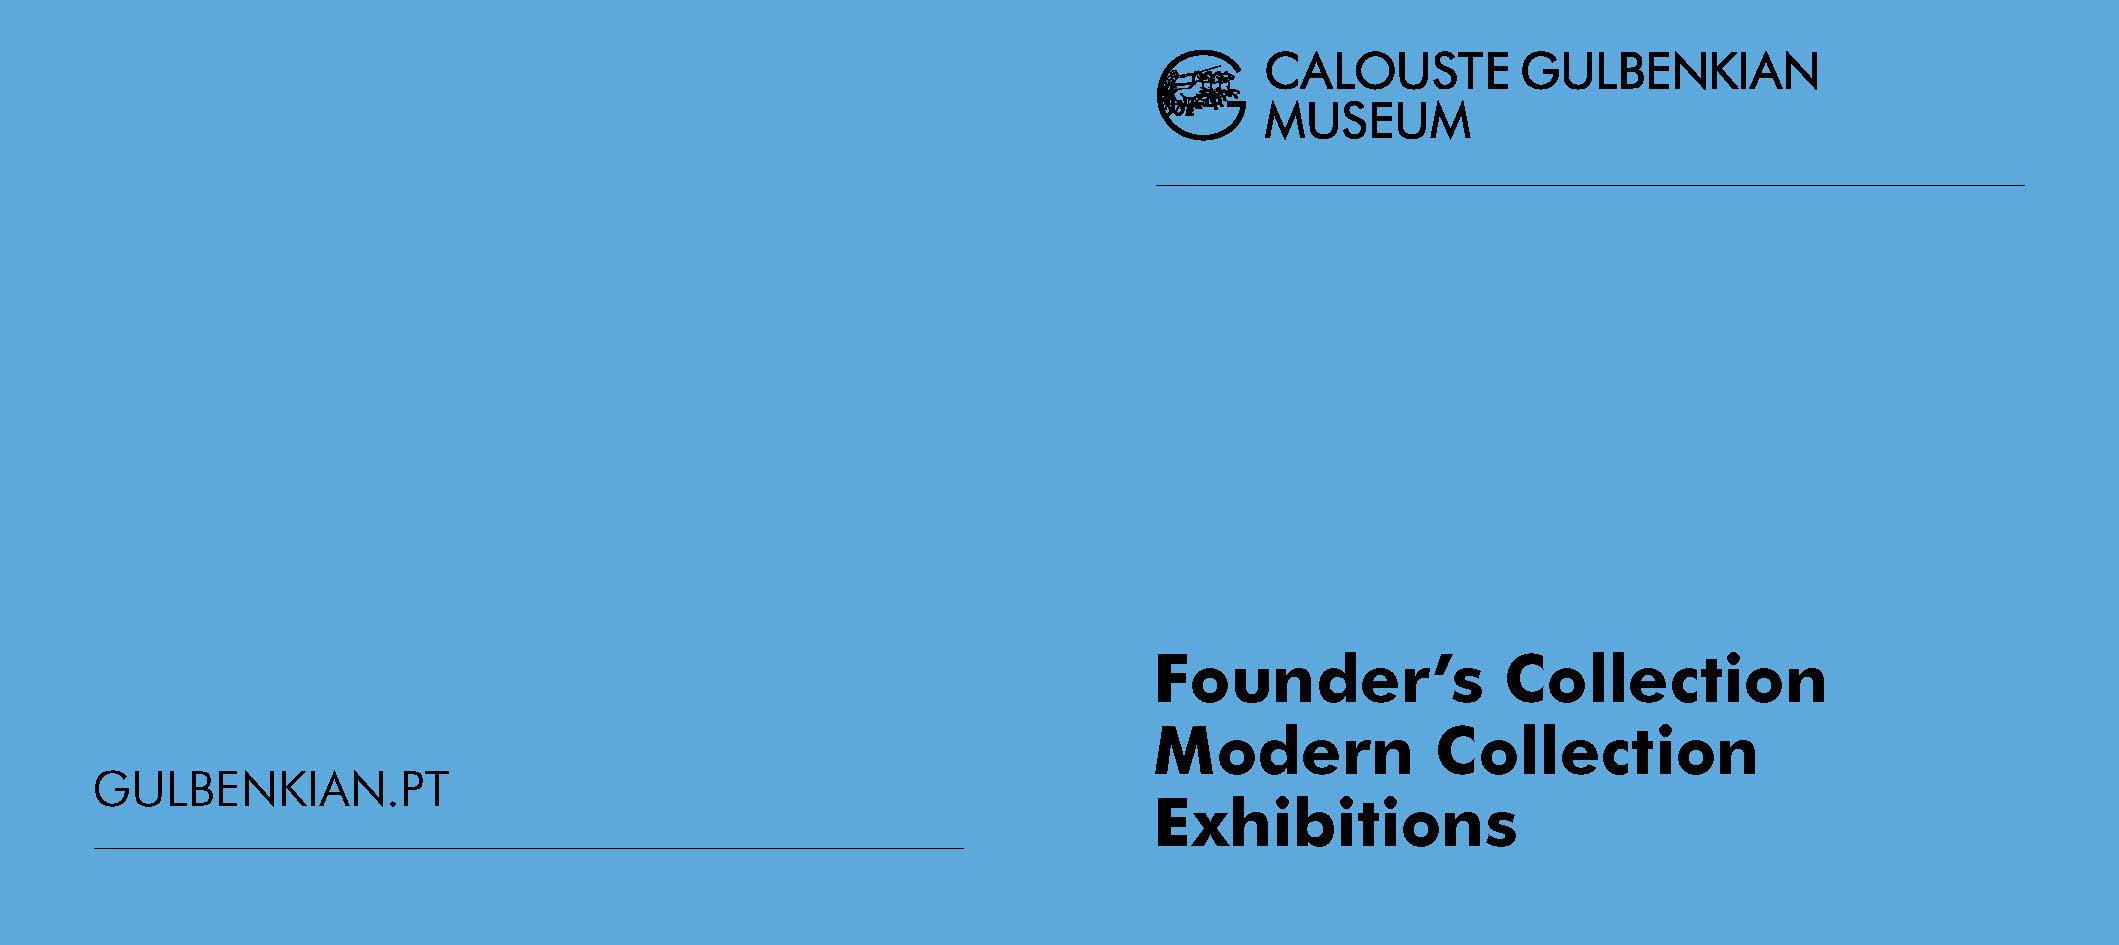 Founder's Collection. Modern Collection. July – December 2020